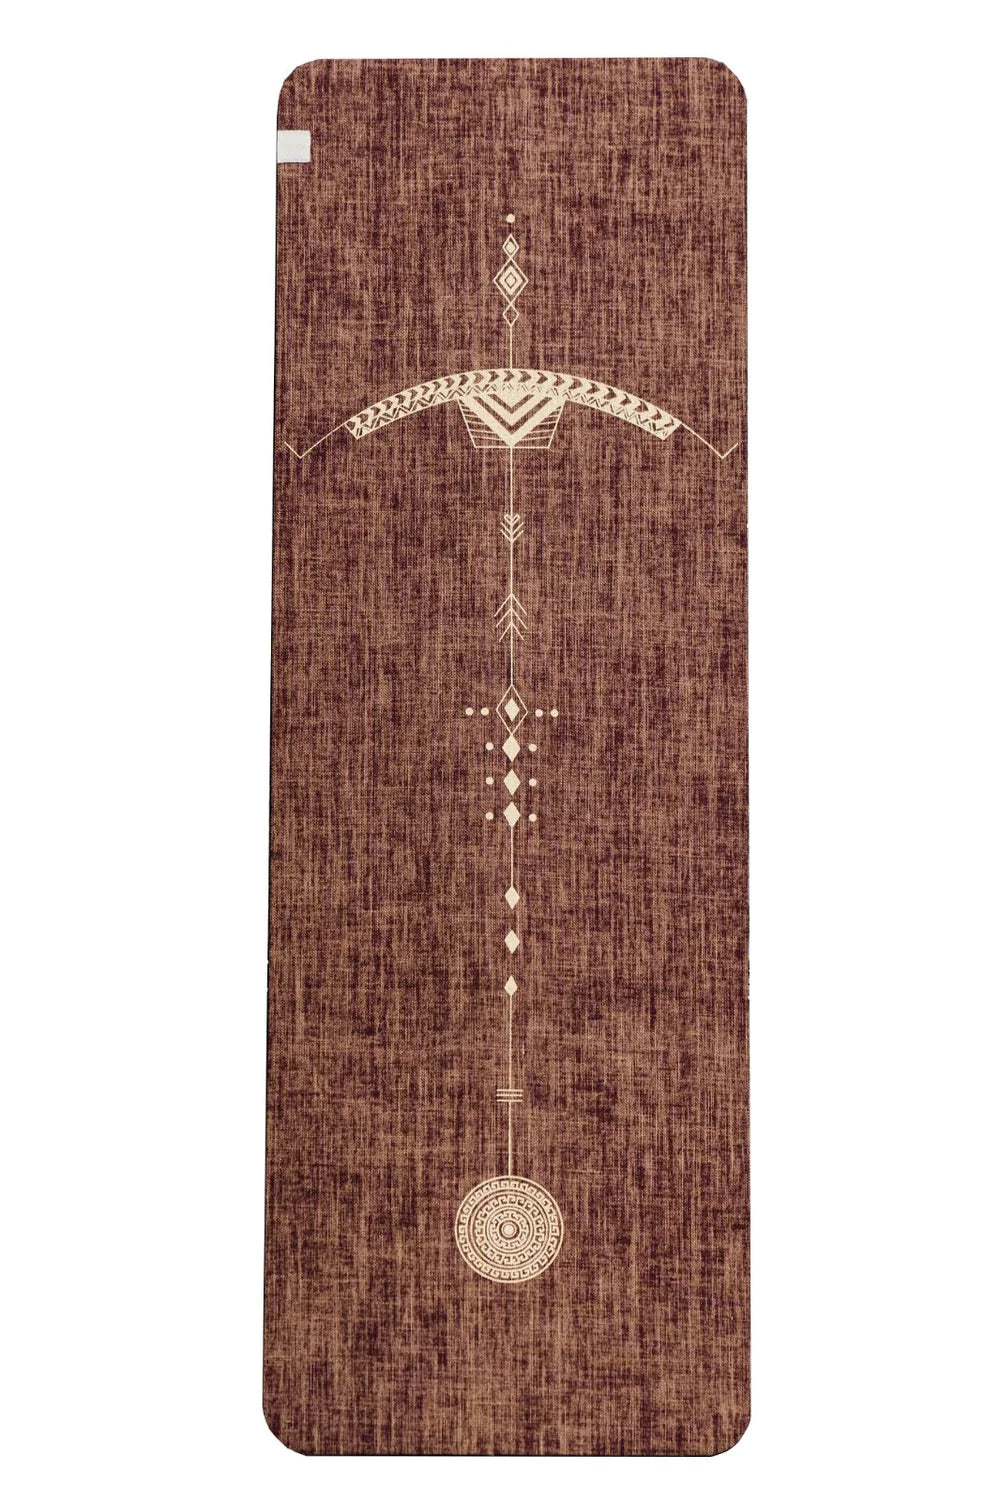 *Yoga Tribe - Bow and Arrow Design Printed on red wine coloured PER and Organic Jute Yoga Mat.